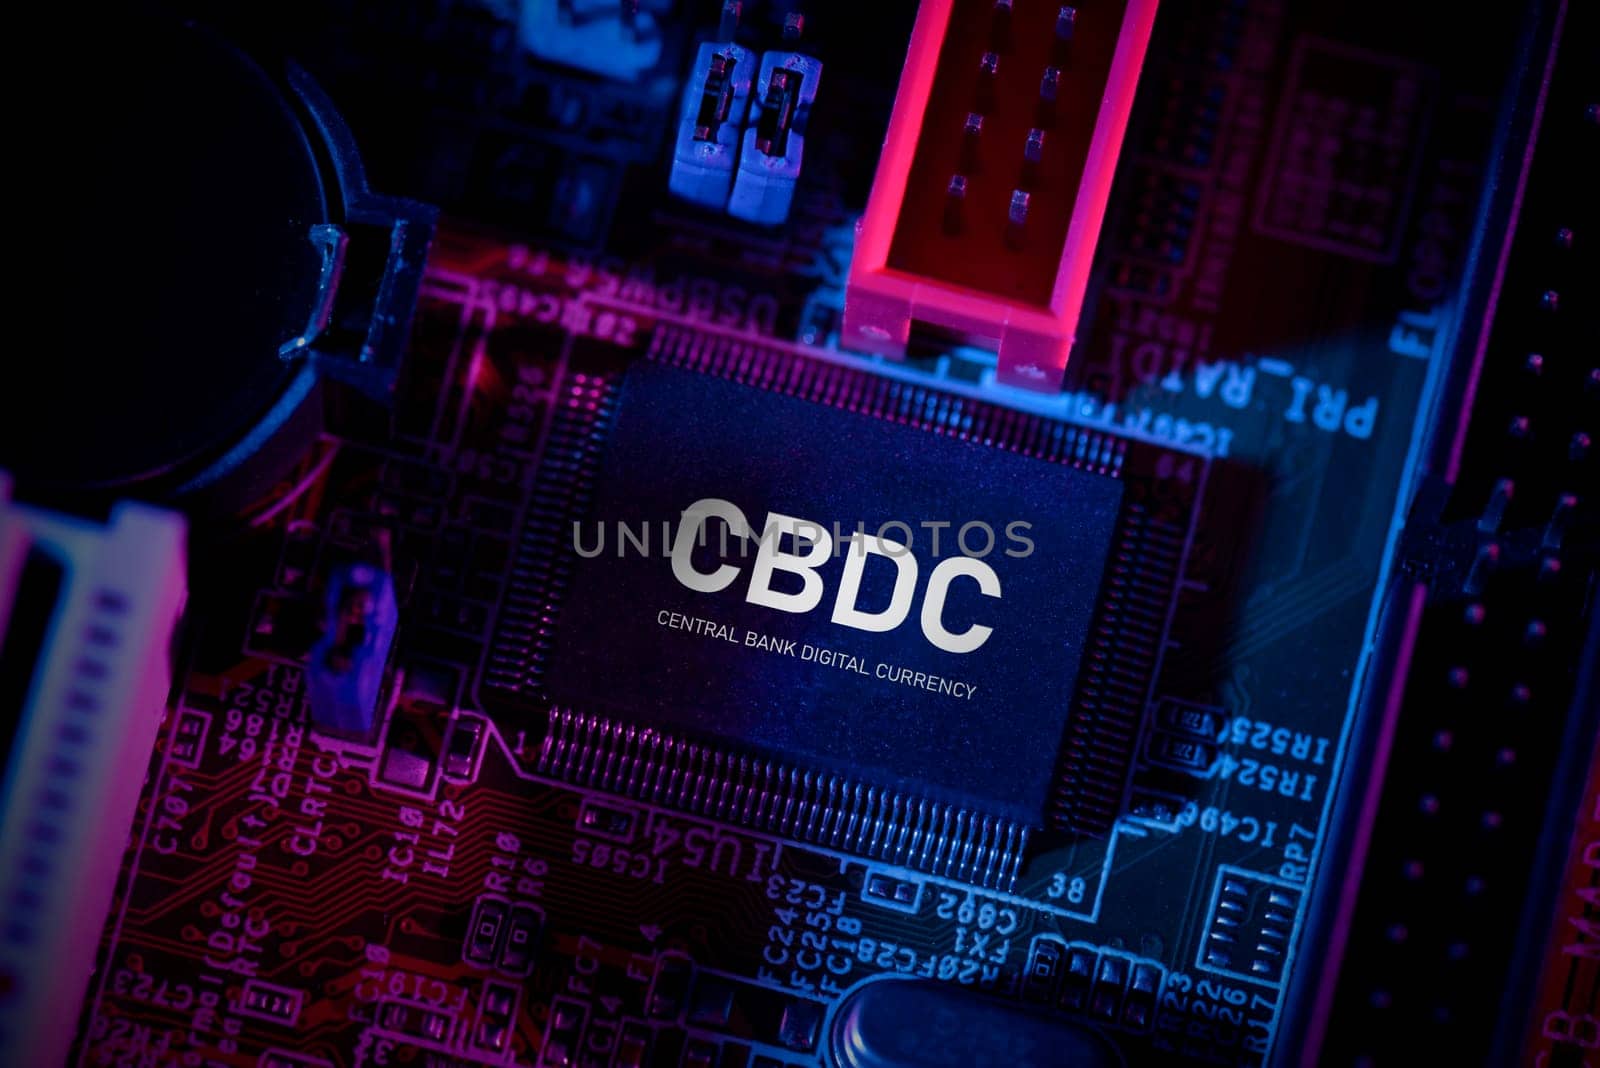 CBDC - central bank digital currency technology. Computer chip on mainboard